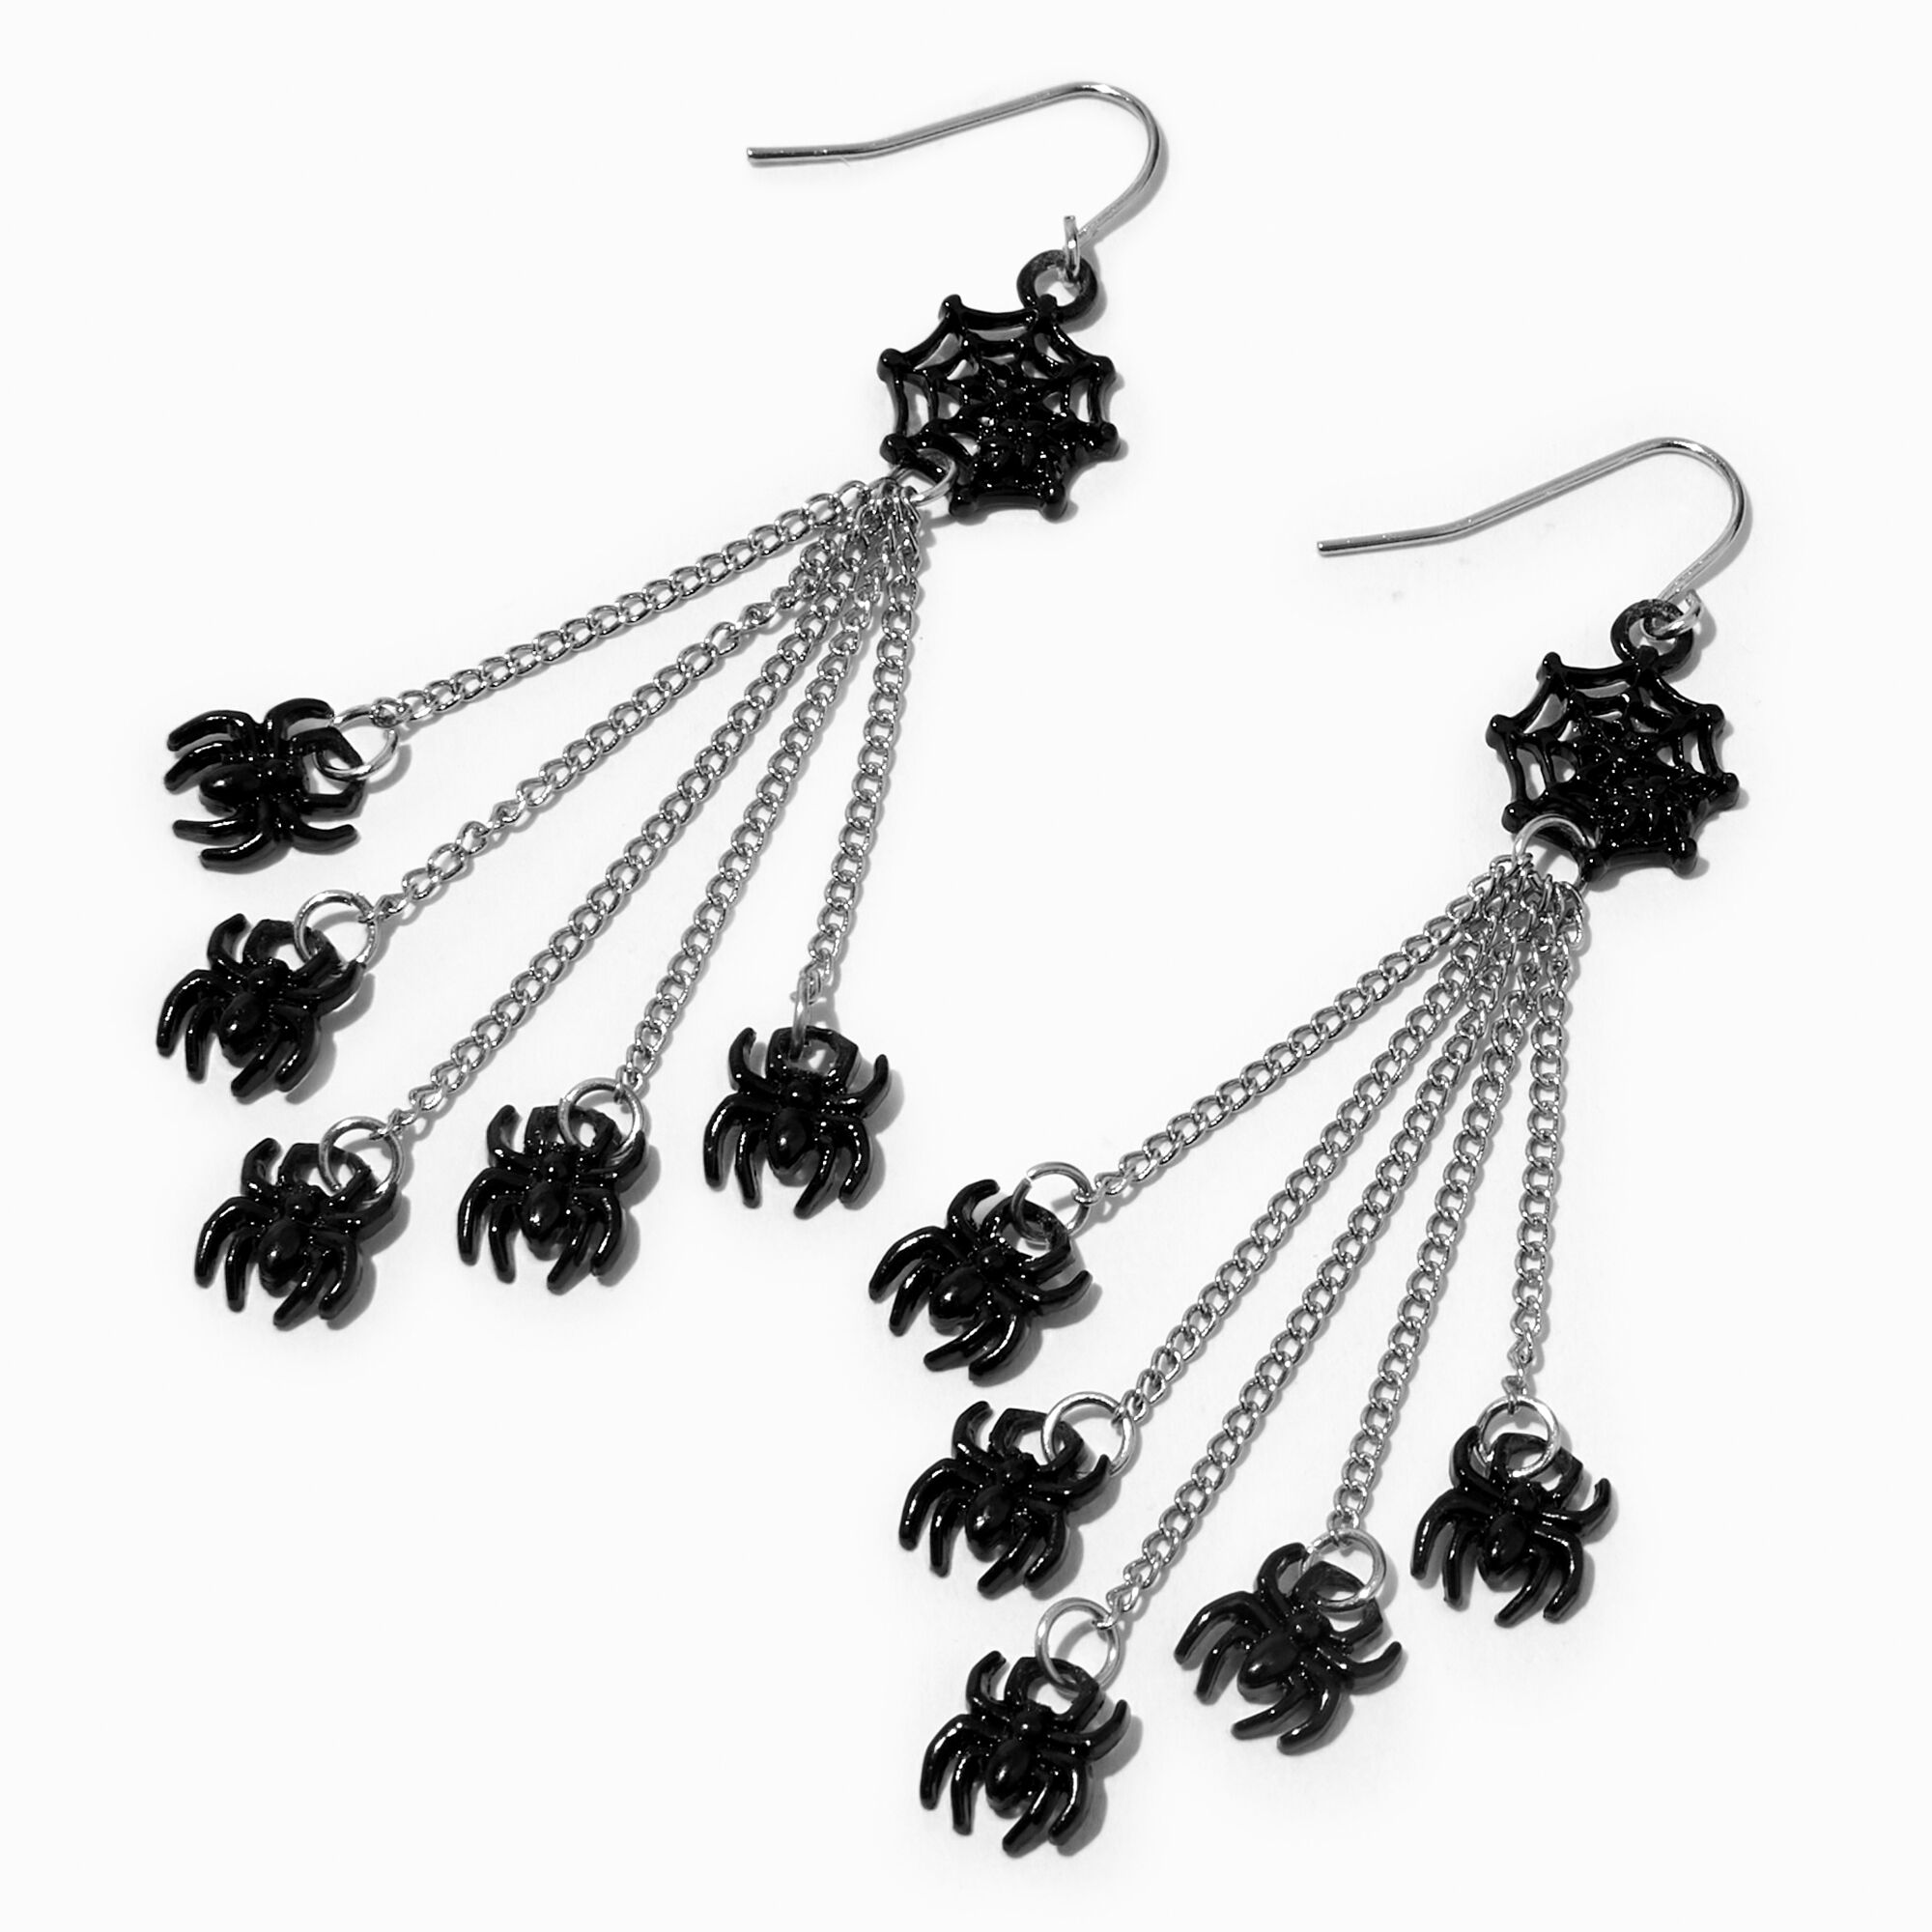 View Claires Spiders Webs 3 Chain Drop Earrings Black information